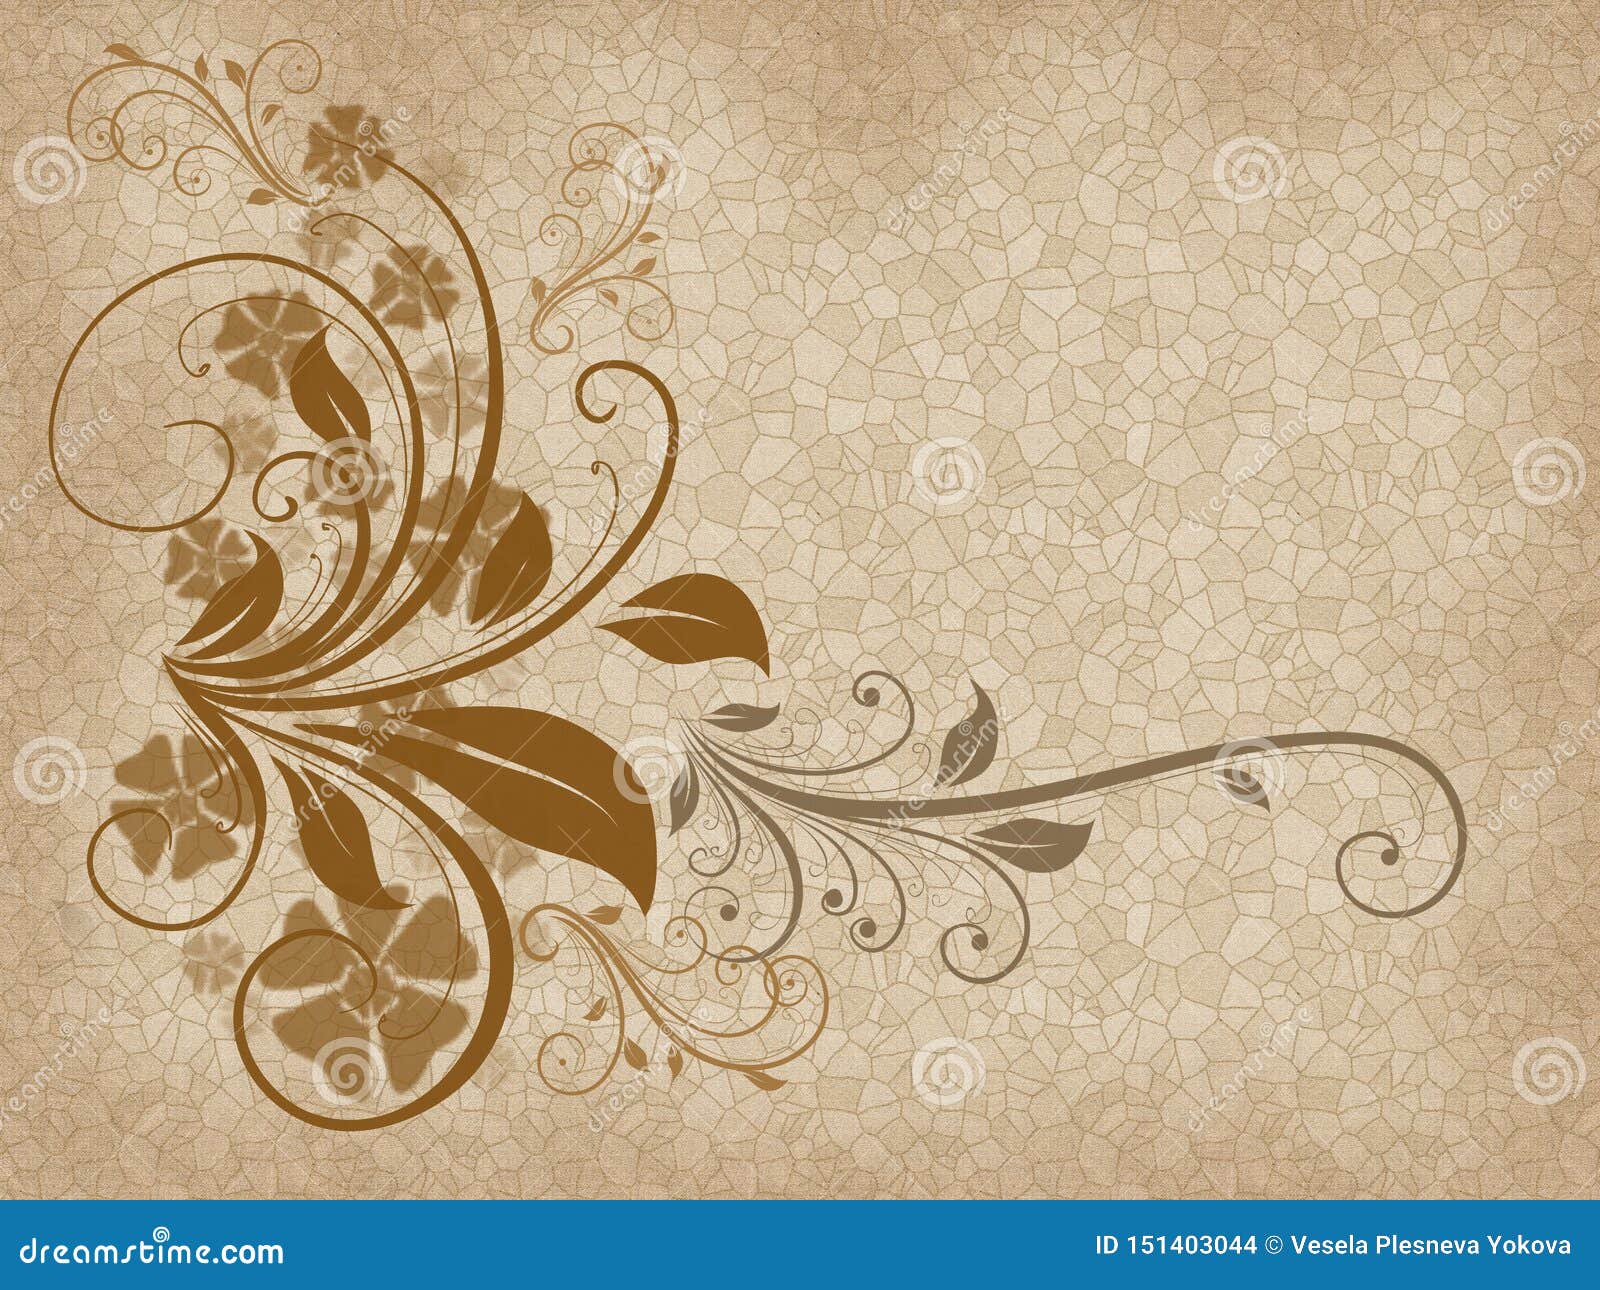 Beautiful Brown Floral Elements on the Mosaic Background Stock Vector -  Illustration of design, work: 151403044